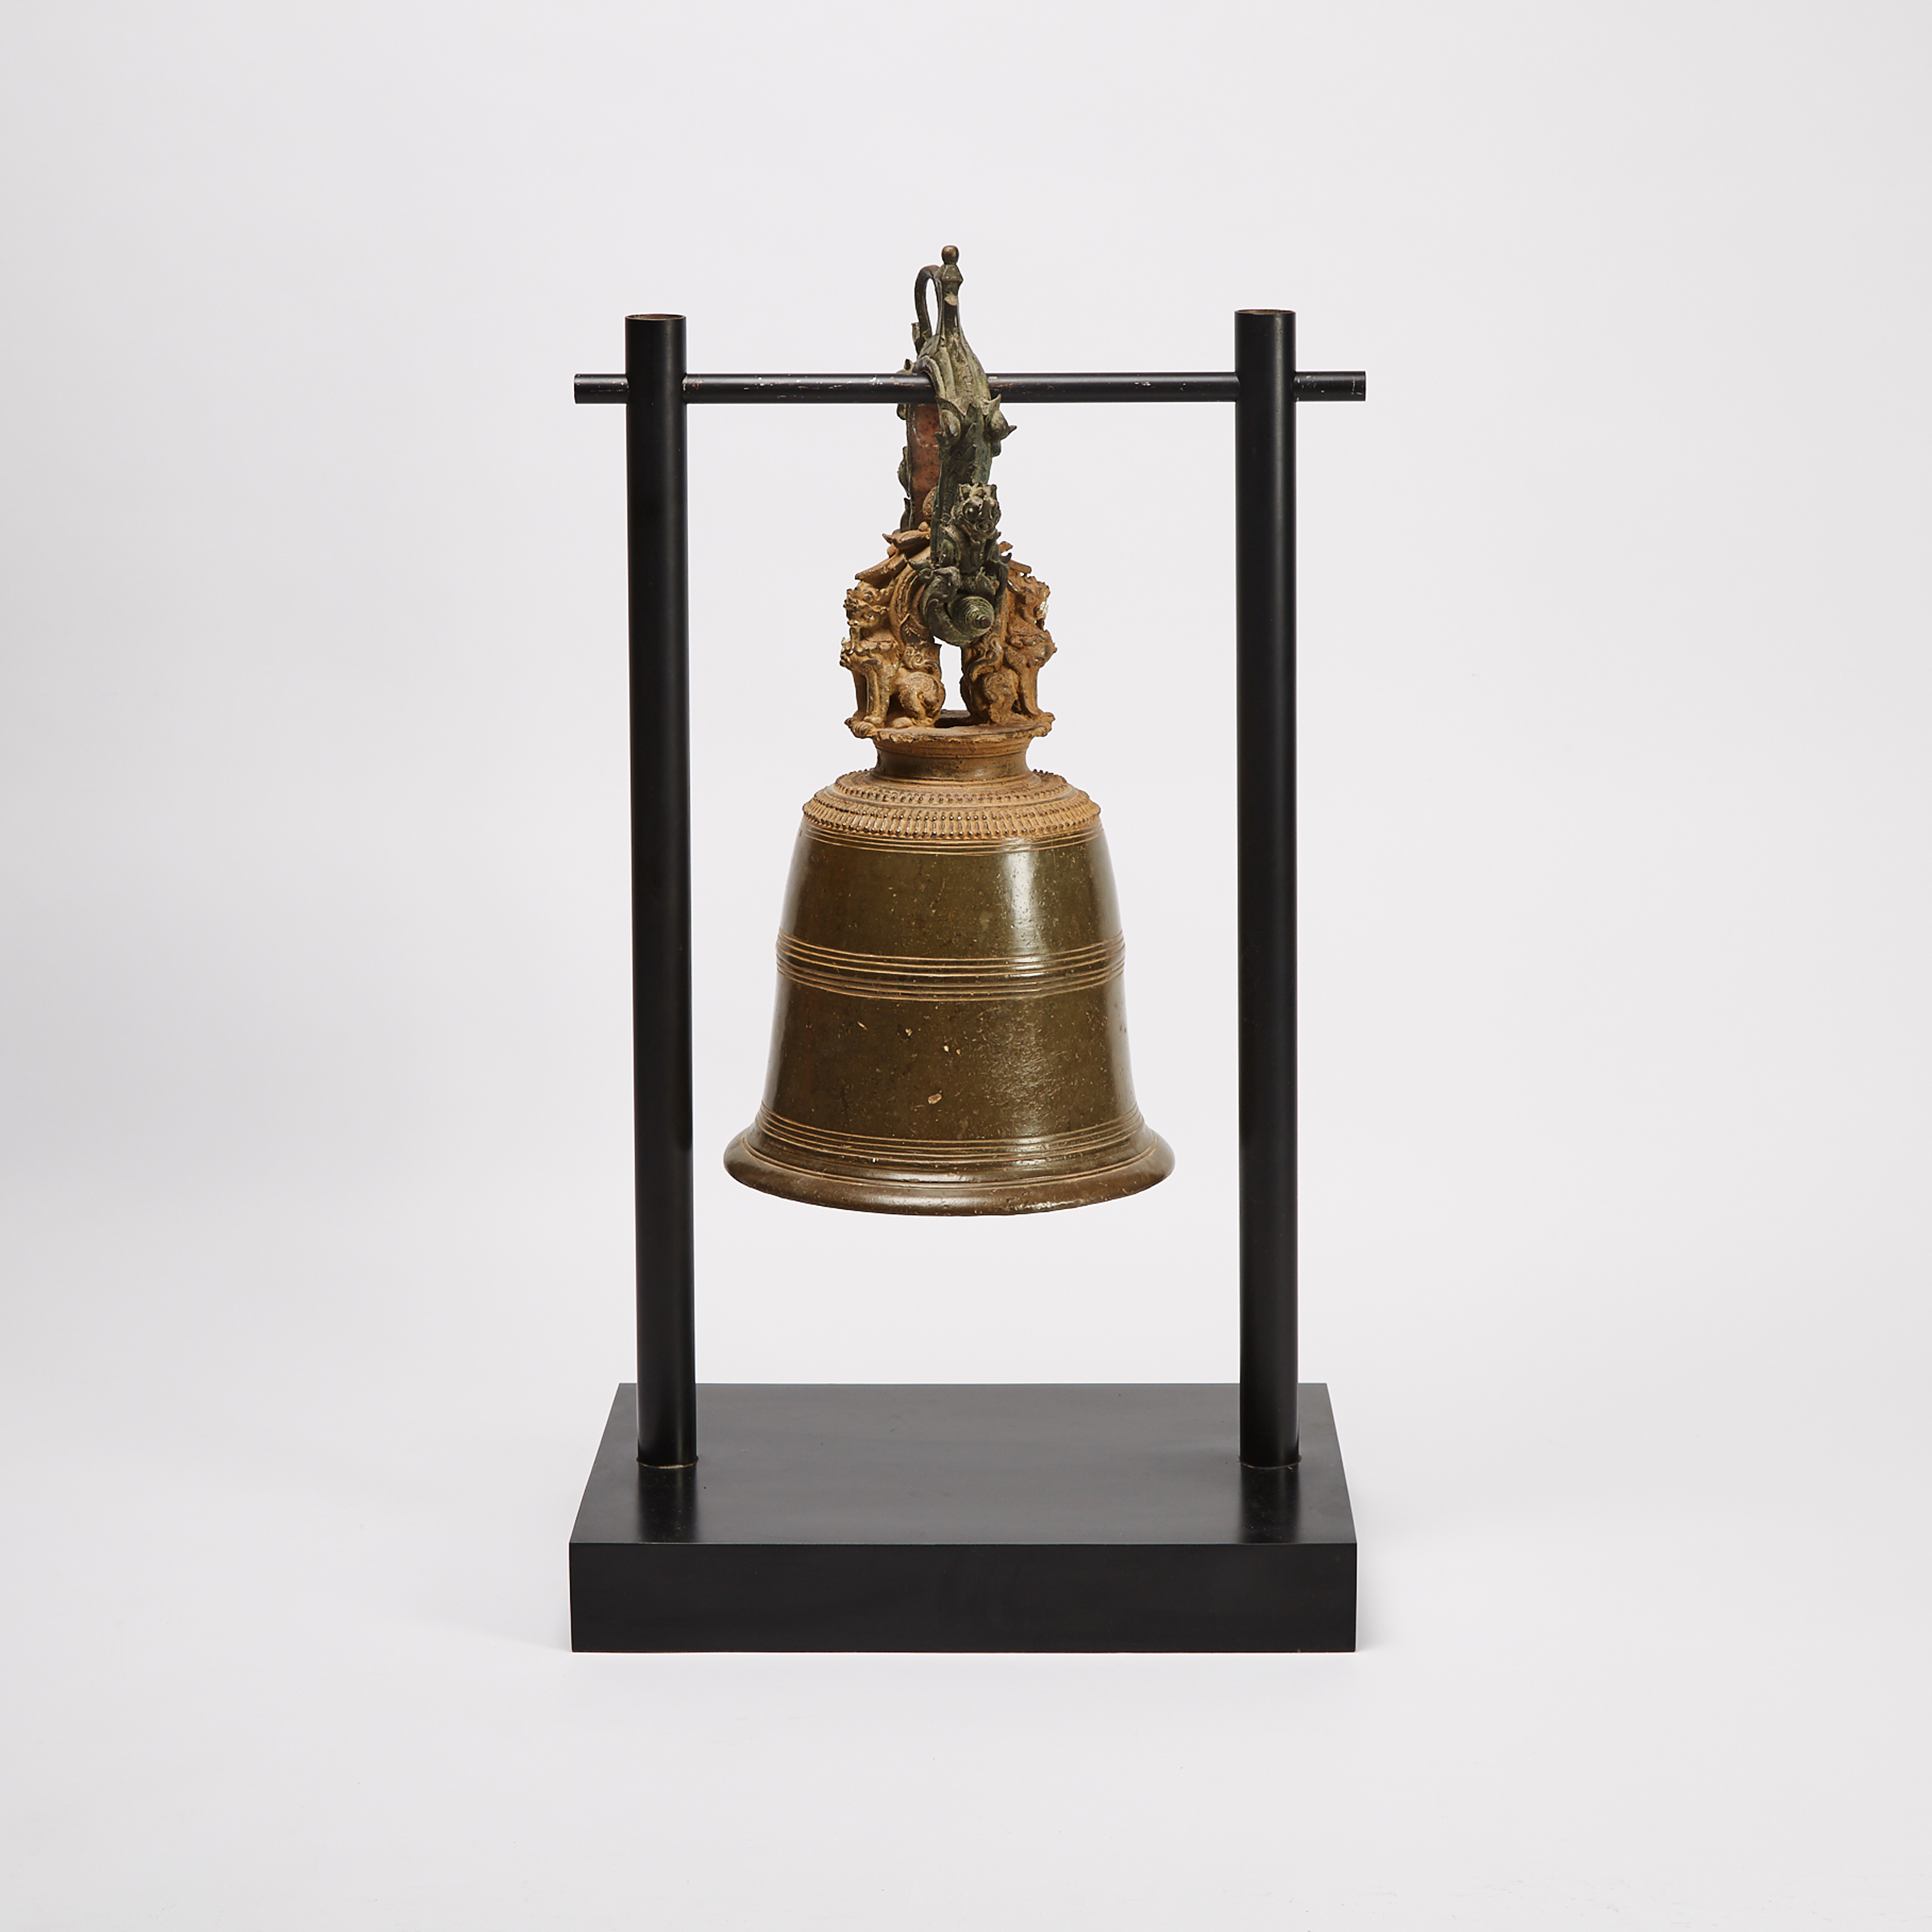 A Bronze Temple Bell, Mandalay Period, Burma, Early 19th Century